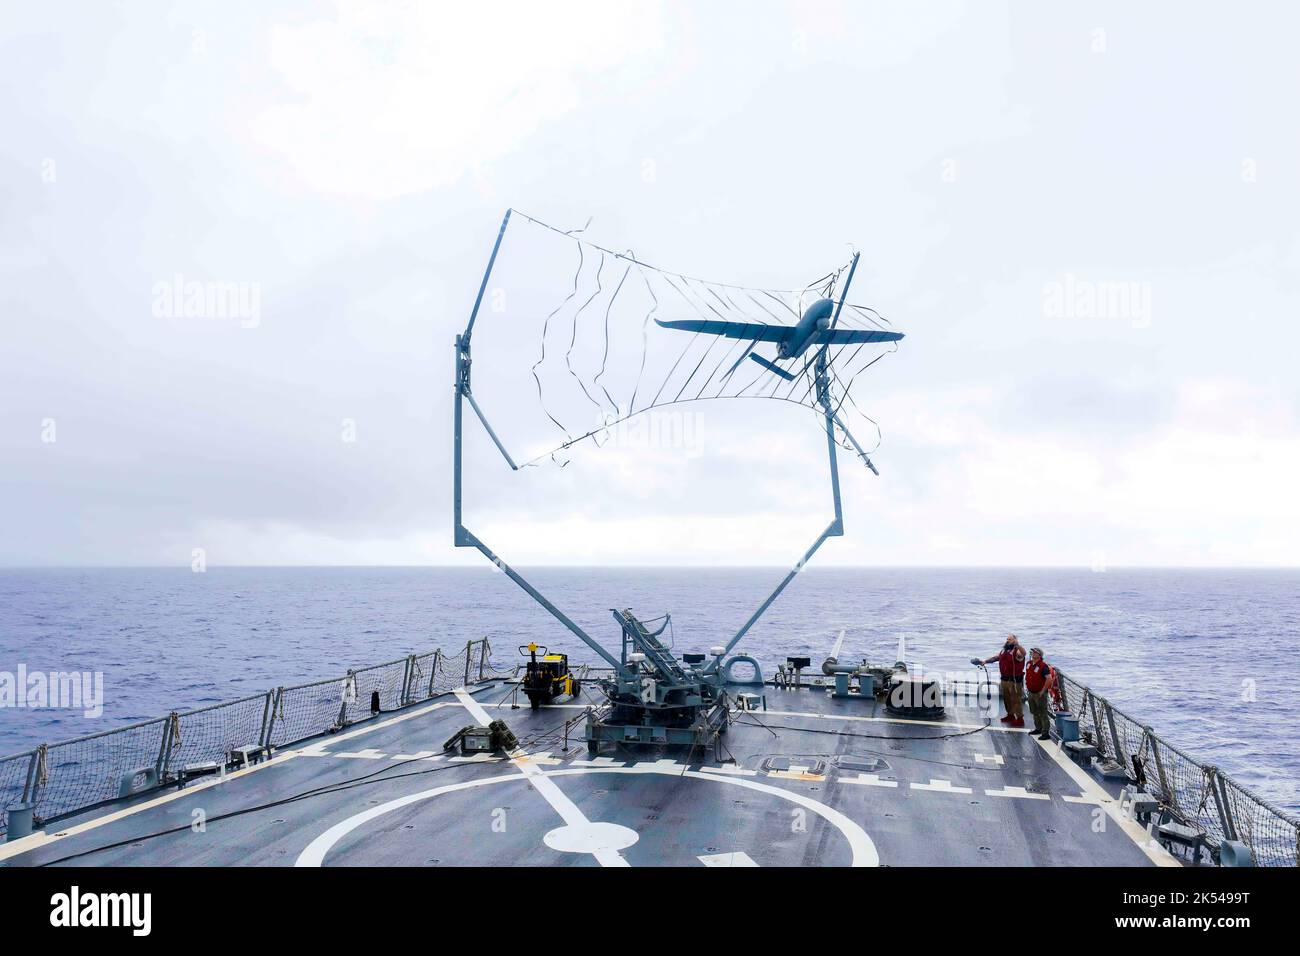 PHILIPPINE SEA (July 4, 2022) - A turntable launch and recovery system recovers an Aerosonde unmanned aerial vehicle on the flight deck of Arleigh Burke-class guided-missile destroyer USS Higgins (DDG 76) while conducting operations in the U.S. 7th Fleet area of operations, July 4, 2022. Higgins is assigned to Commander, Task Force (CTF) 71/Destroyer Squadron (DESRON) 15, the Navy’s largest forward-deployed DESRON and the U.S. 7th Fleet’s principal surface force. (U.S. Navy photo by Mass Communication Specialist 1st Class Donavan K. Patubo) Stock Photo